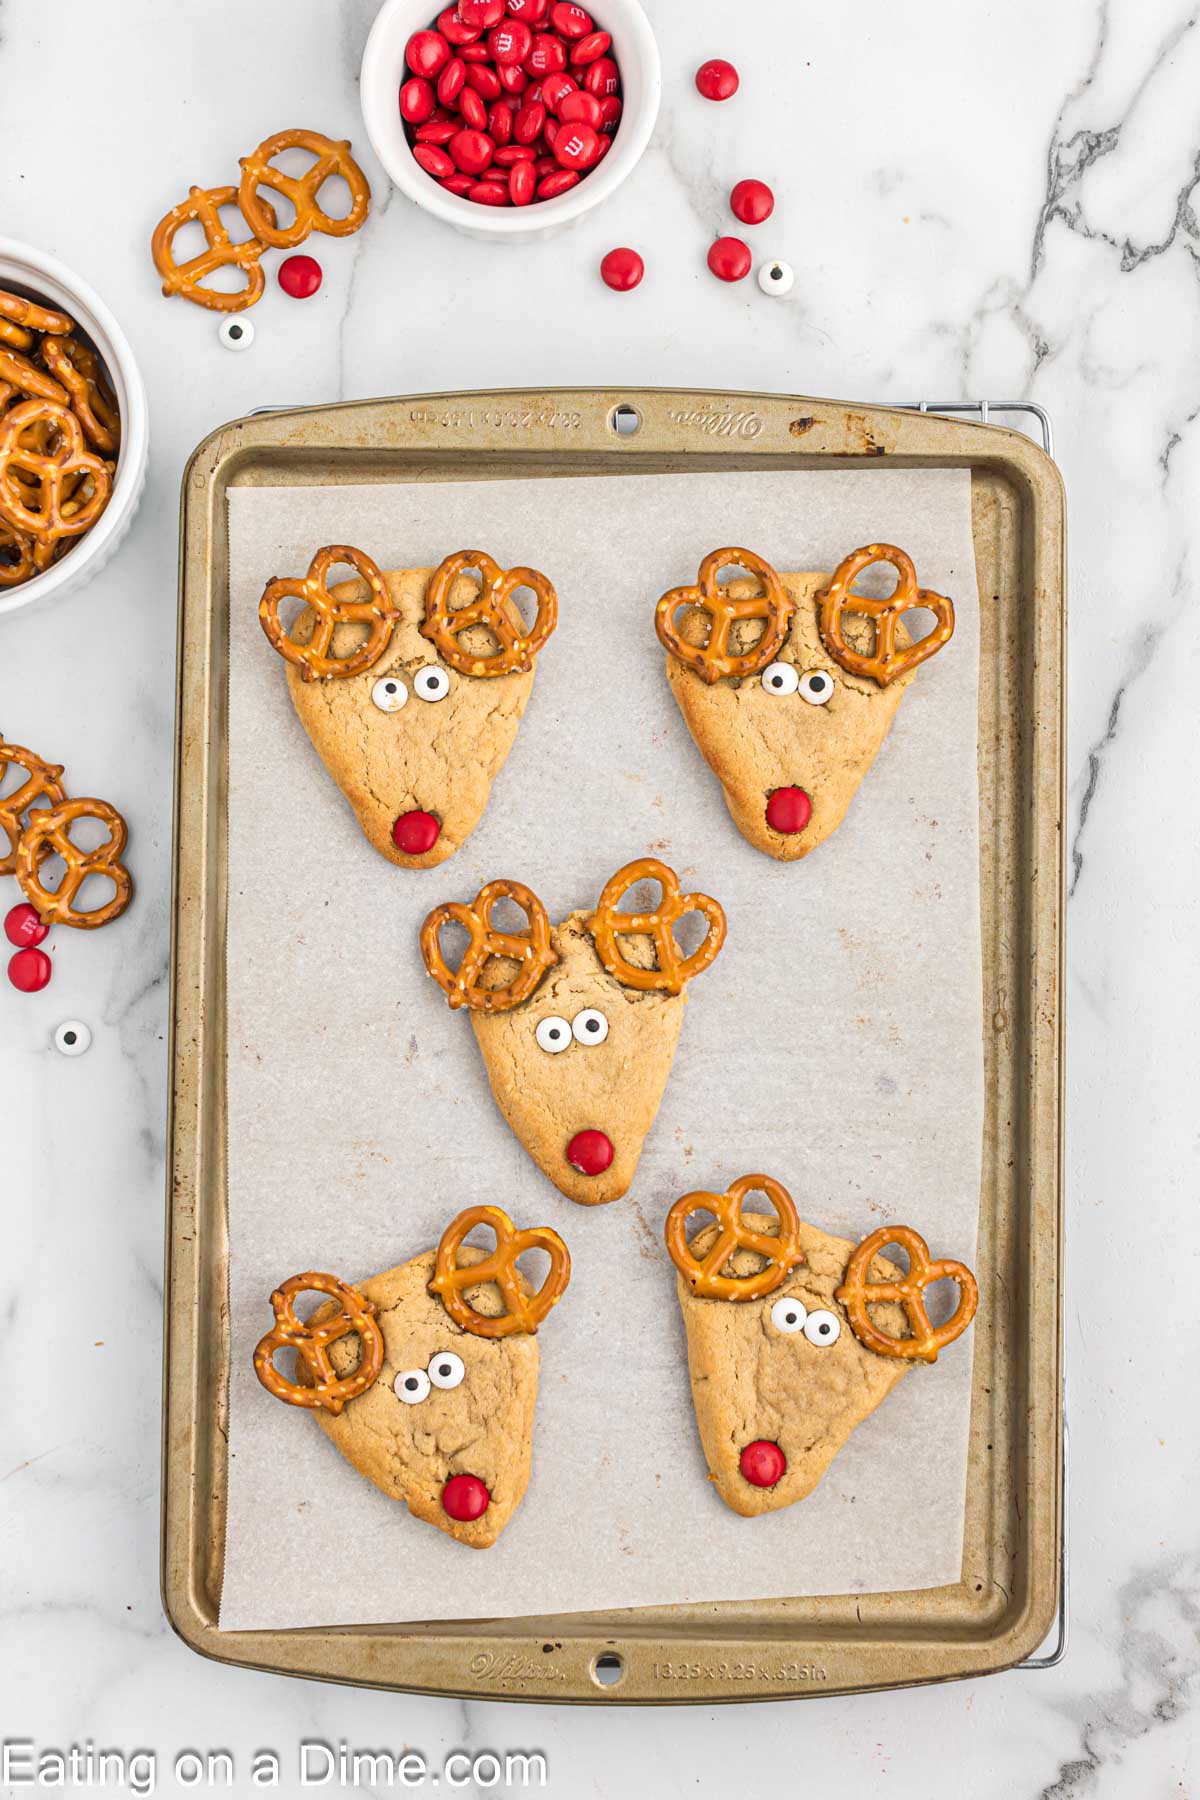 Top the cooked peanut butter cookies with pretzels, candy eyes and red M&M